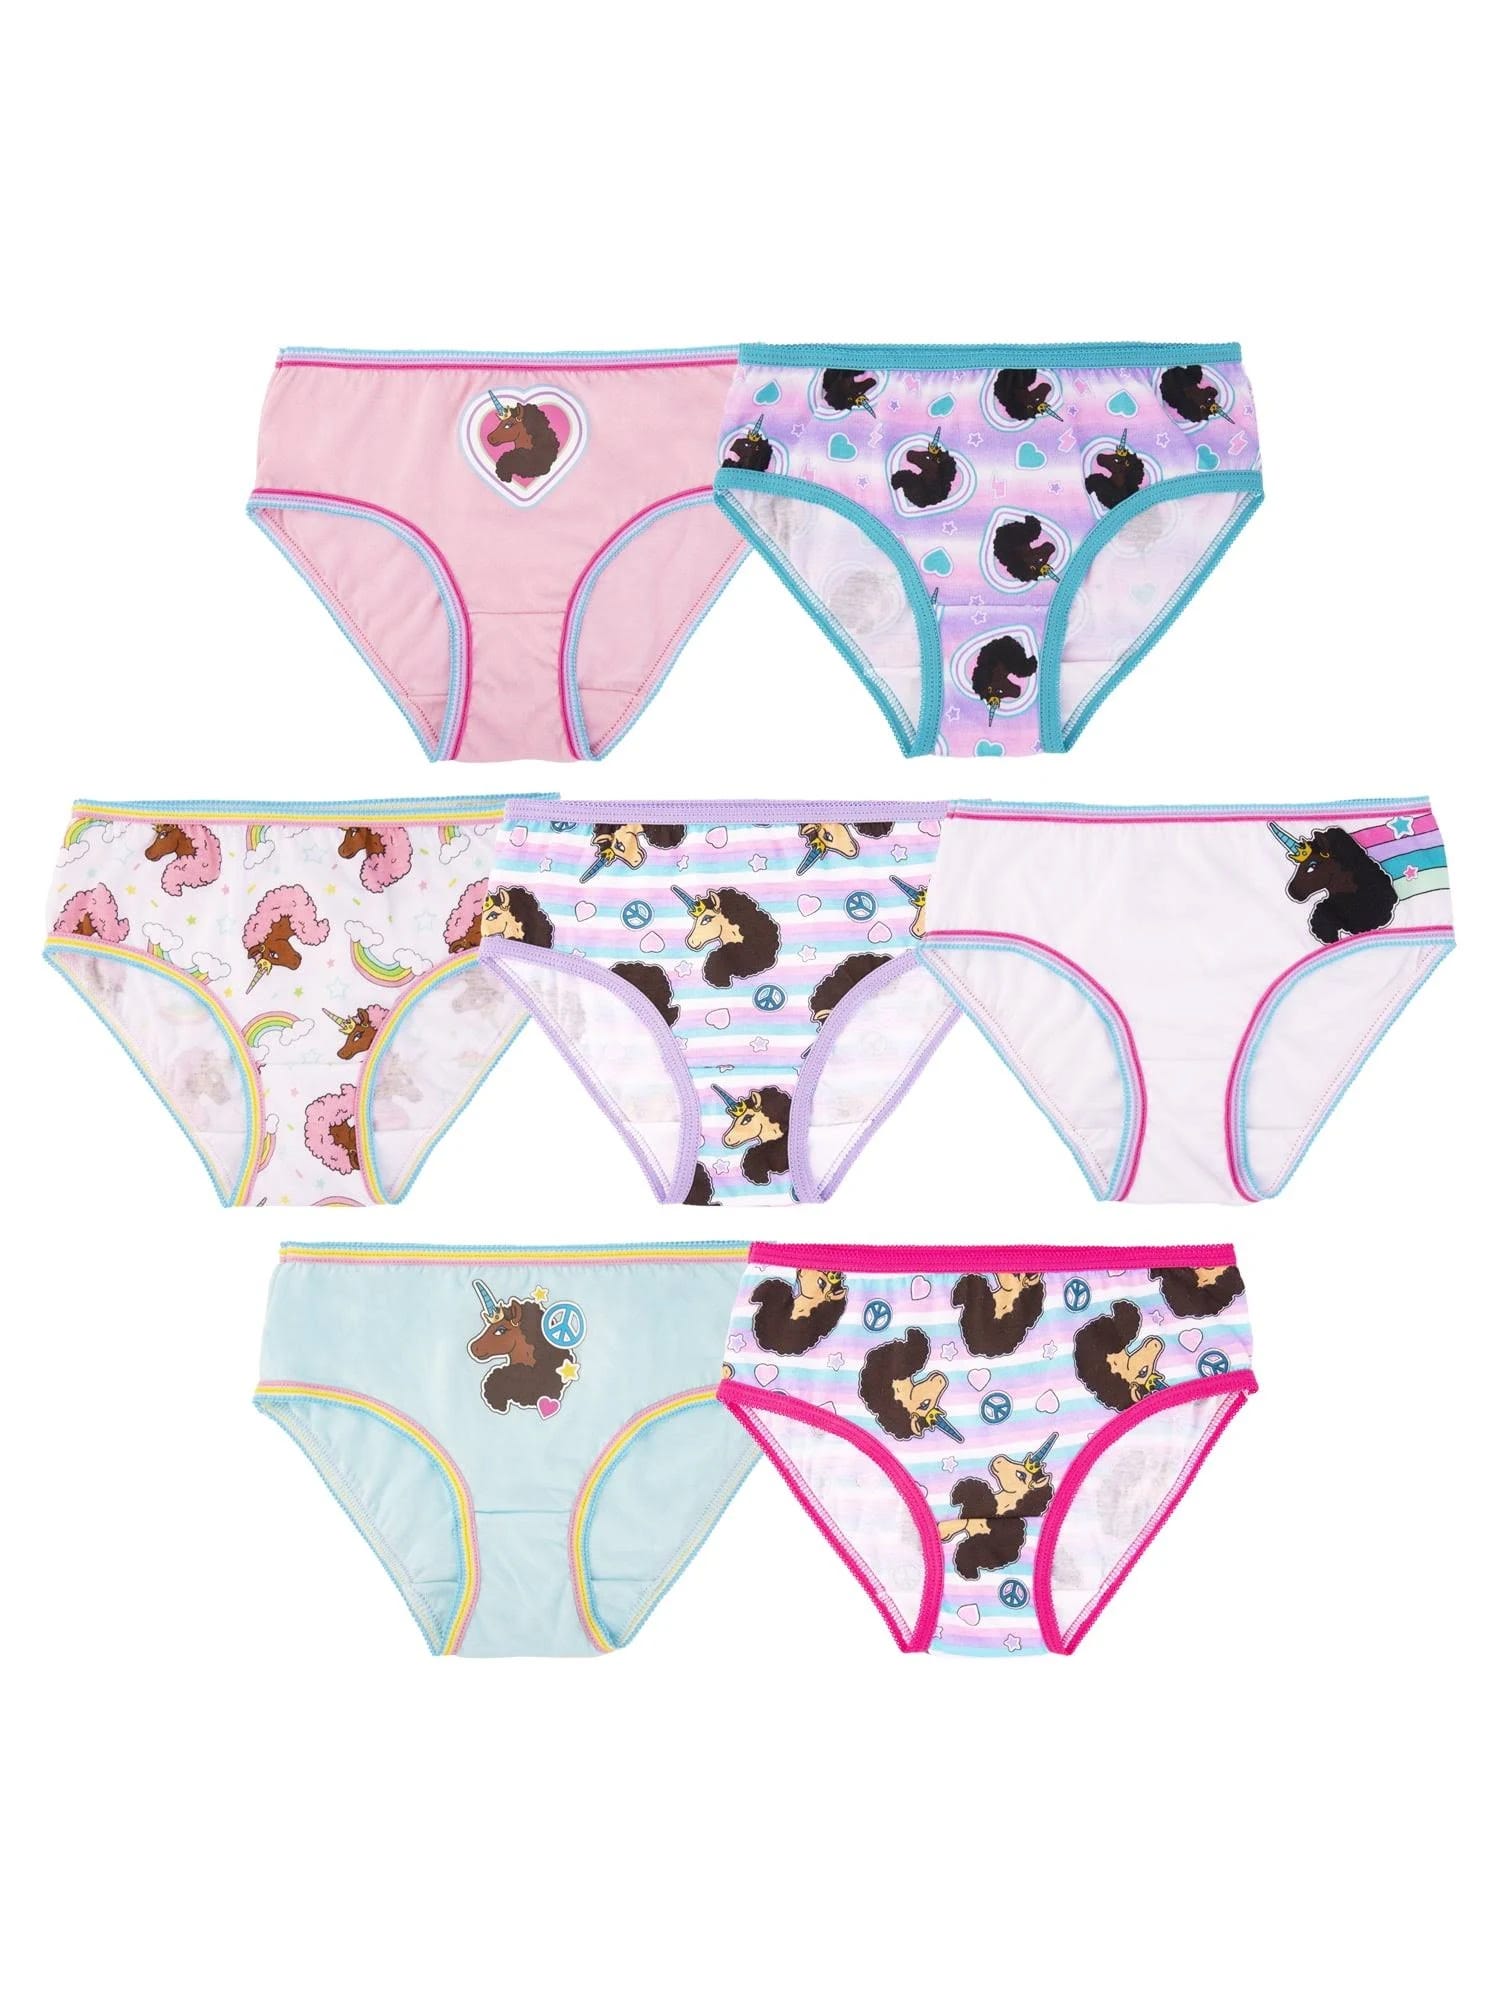 Fun and Colorful Girls Underwear Package - Unique Afro Unicorn Designs | Image